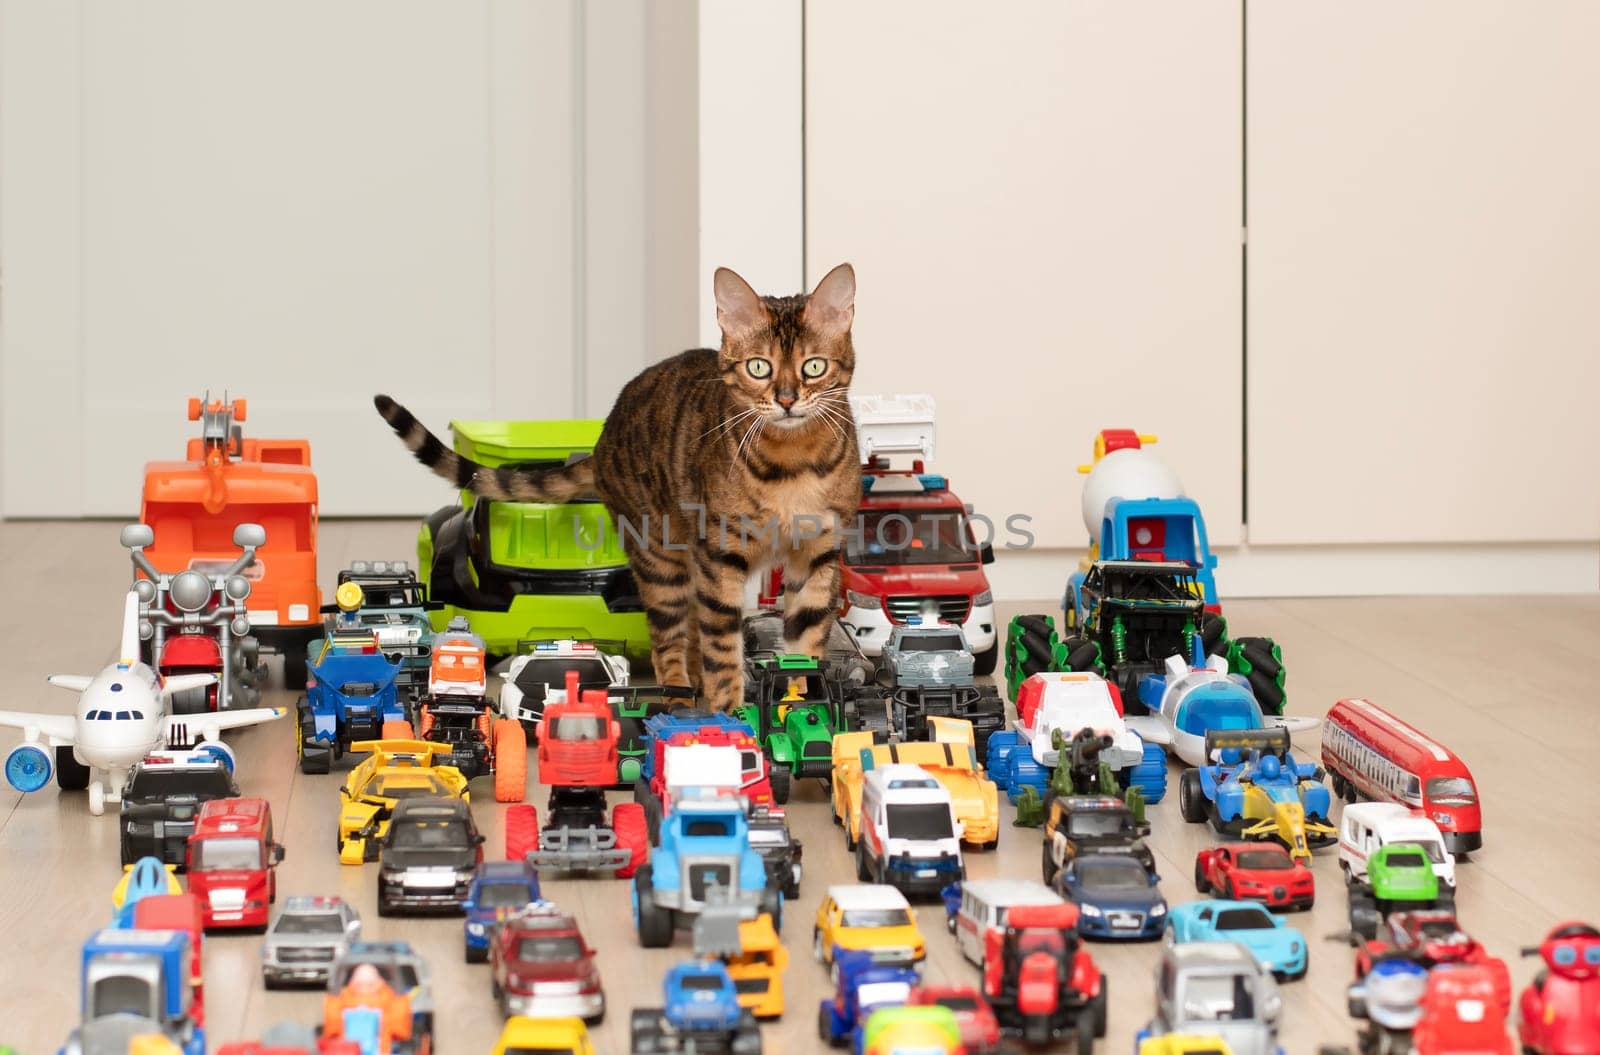 Concept of children's toys. A domestic beautiful, red and tabby Bengal cat walks on the floor, among colorful small and large toy cars in the children's room. by ketlit